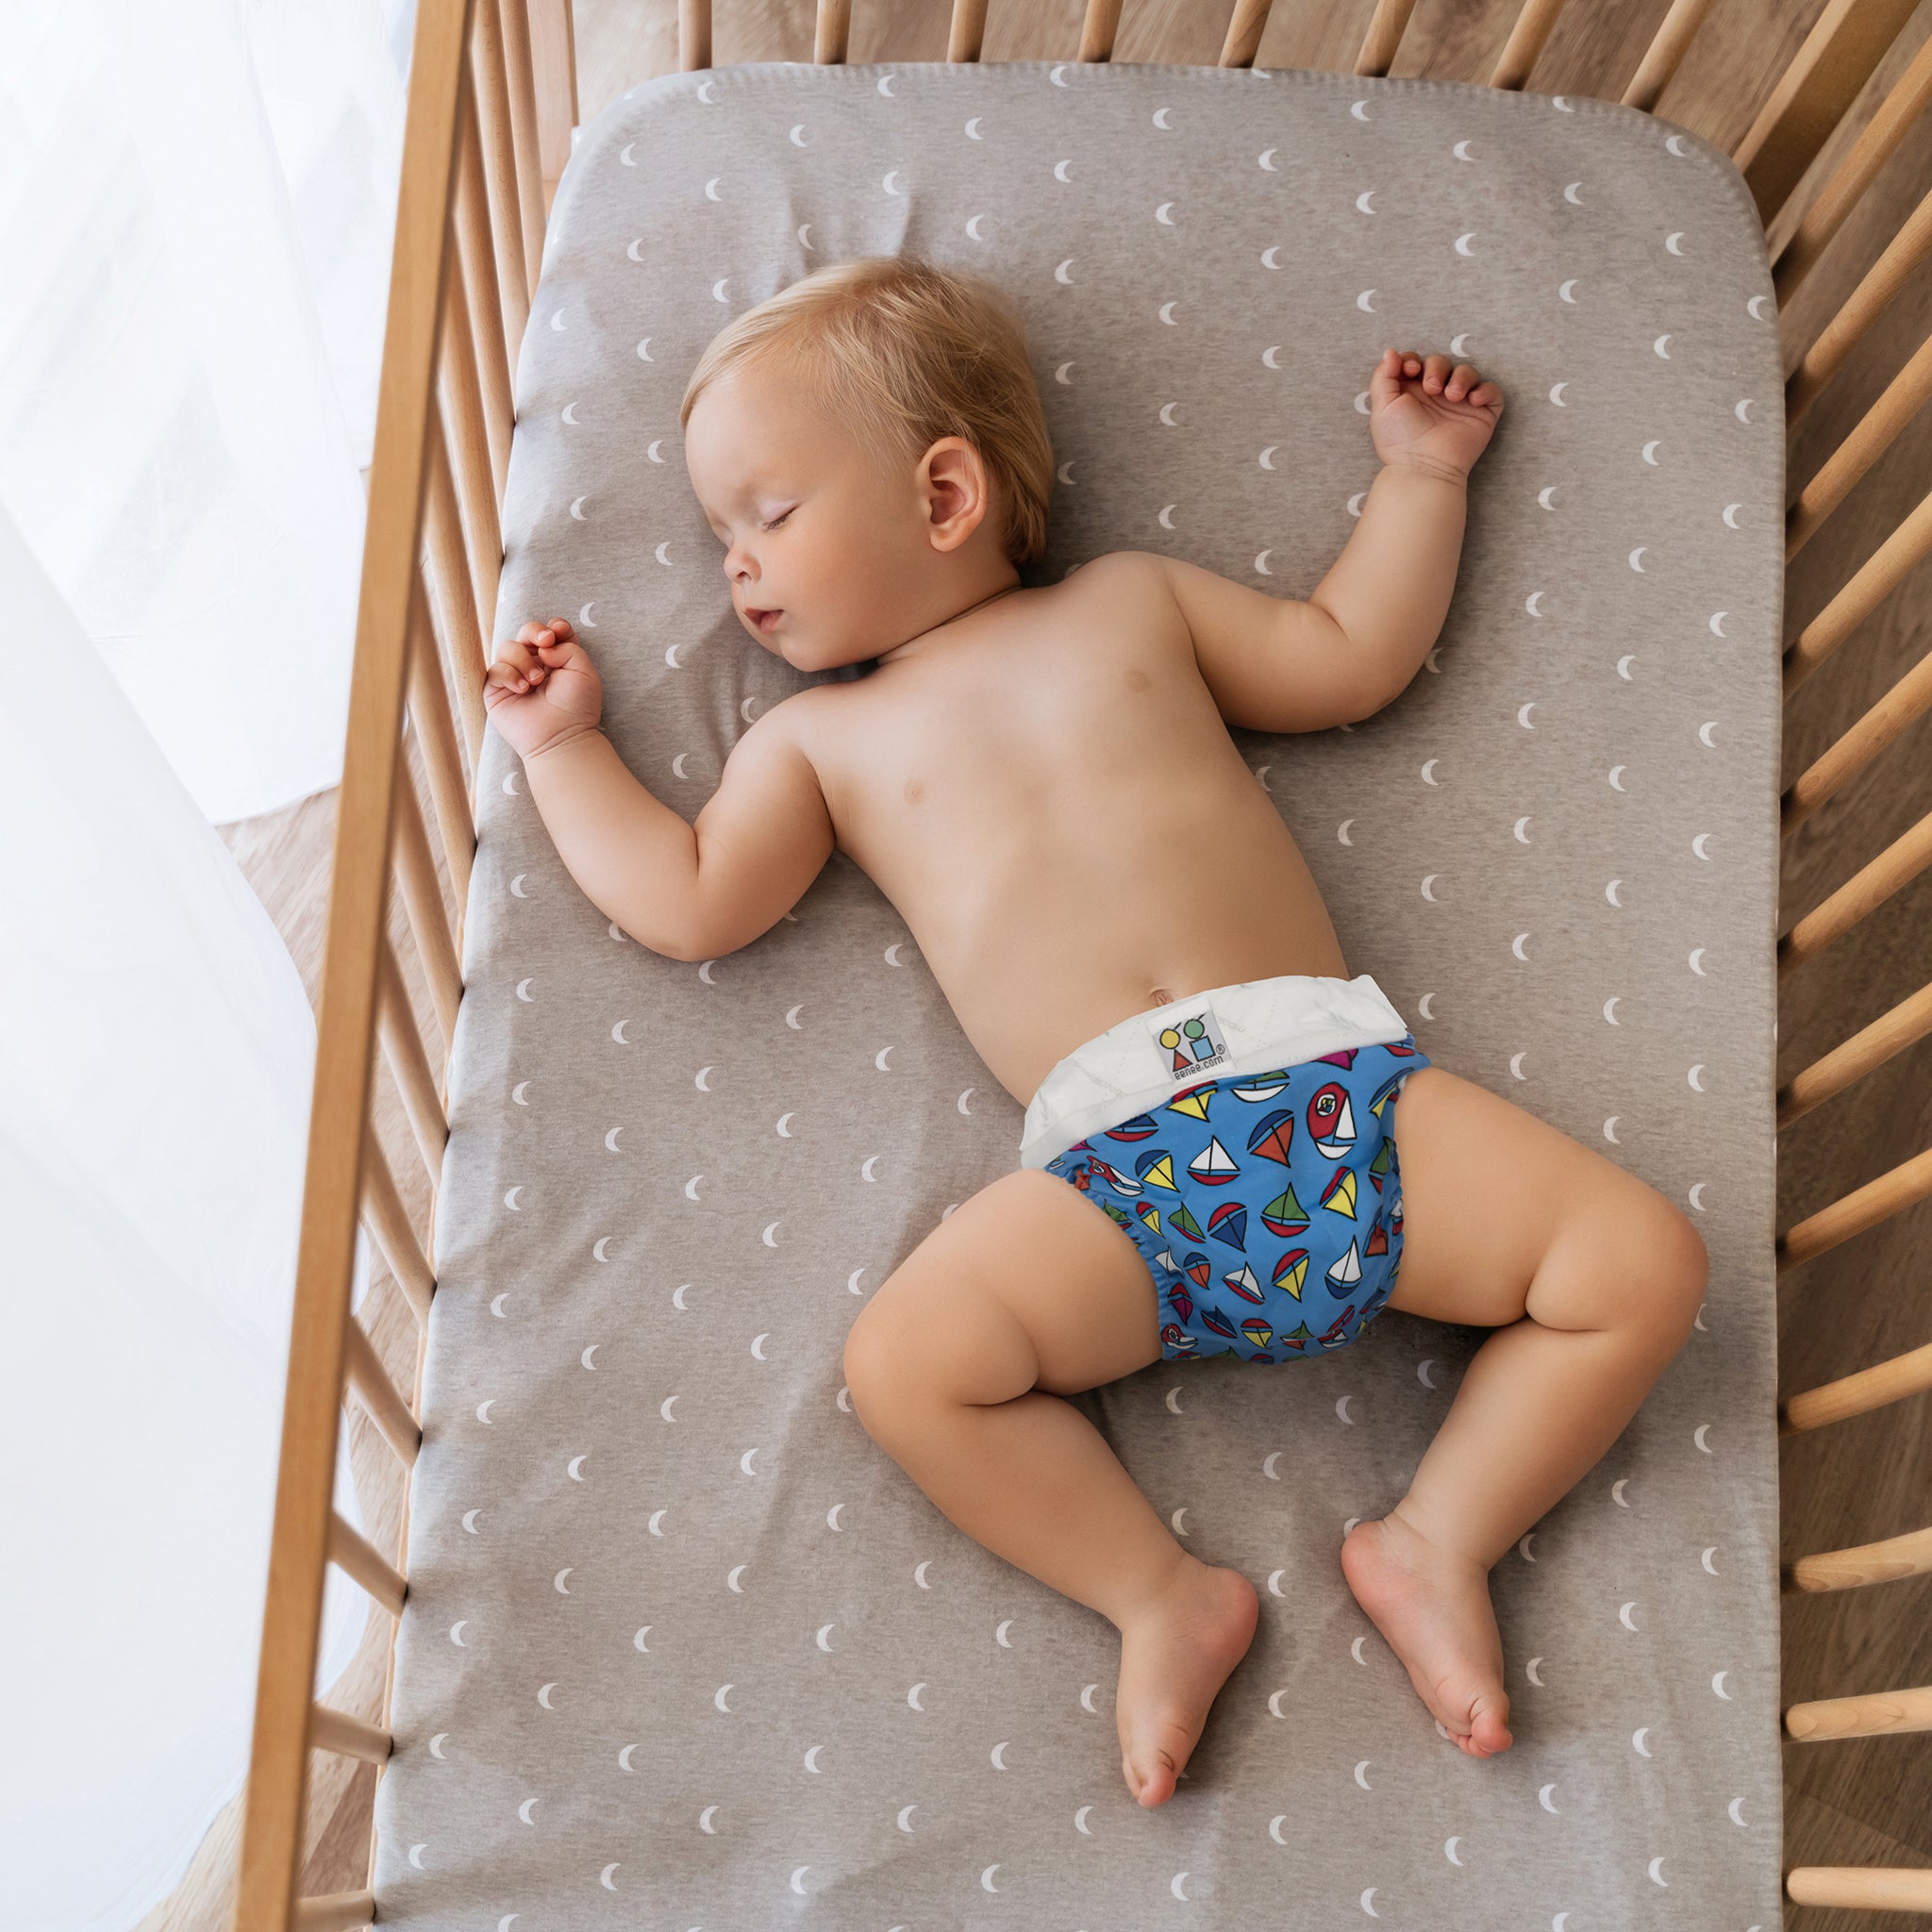 Baby asleep wearing blue hybrid nappy pants with sailboat design